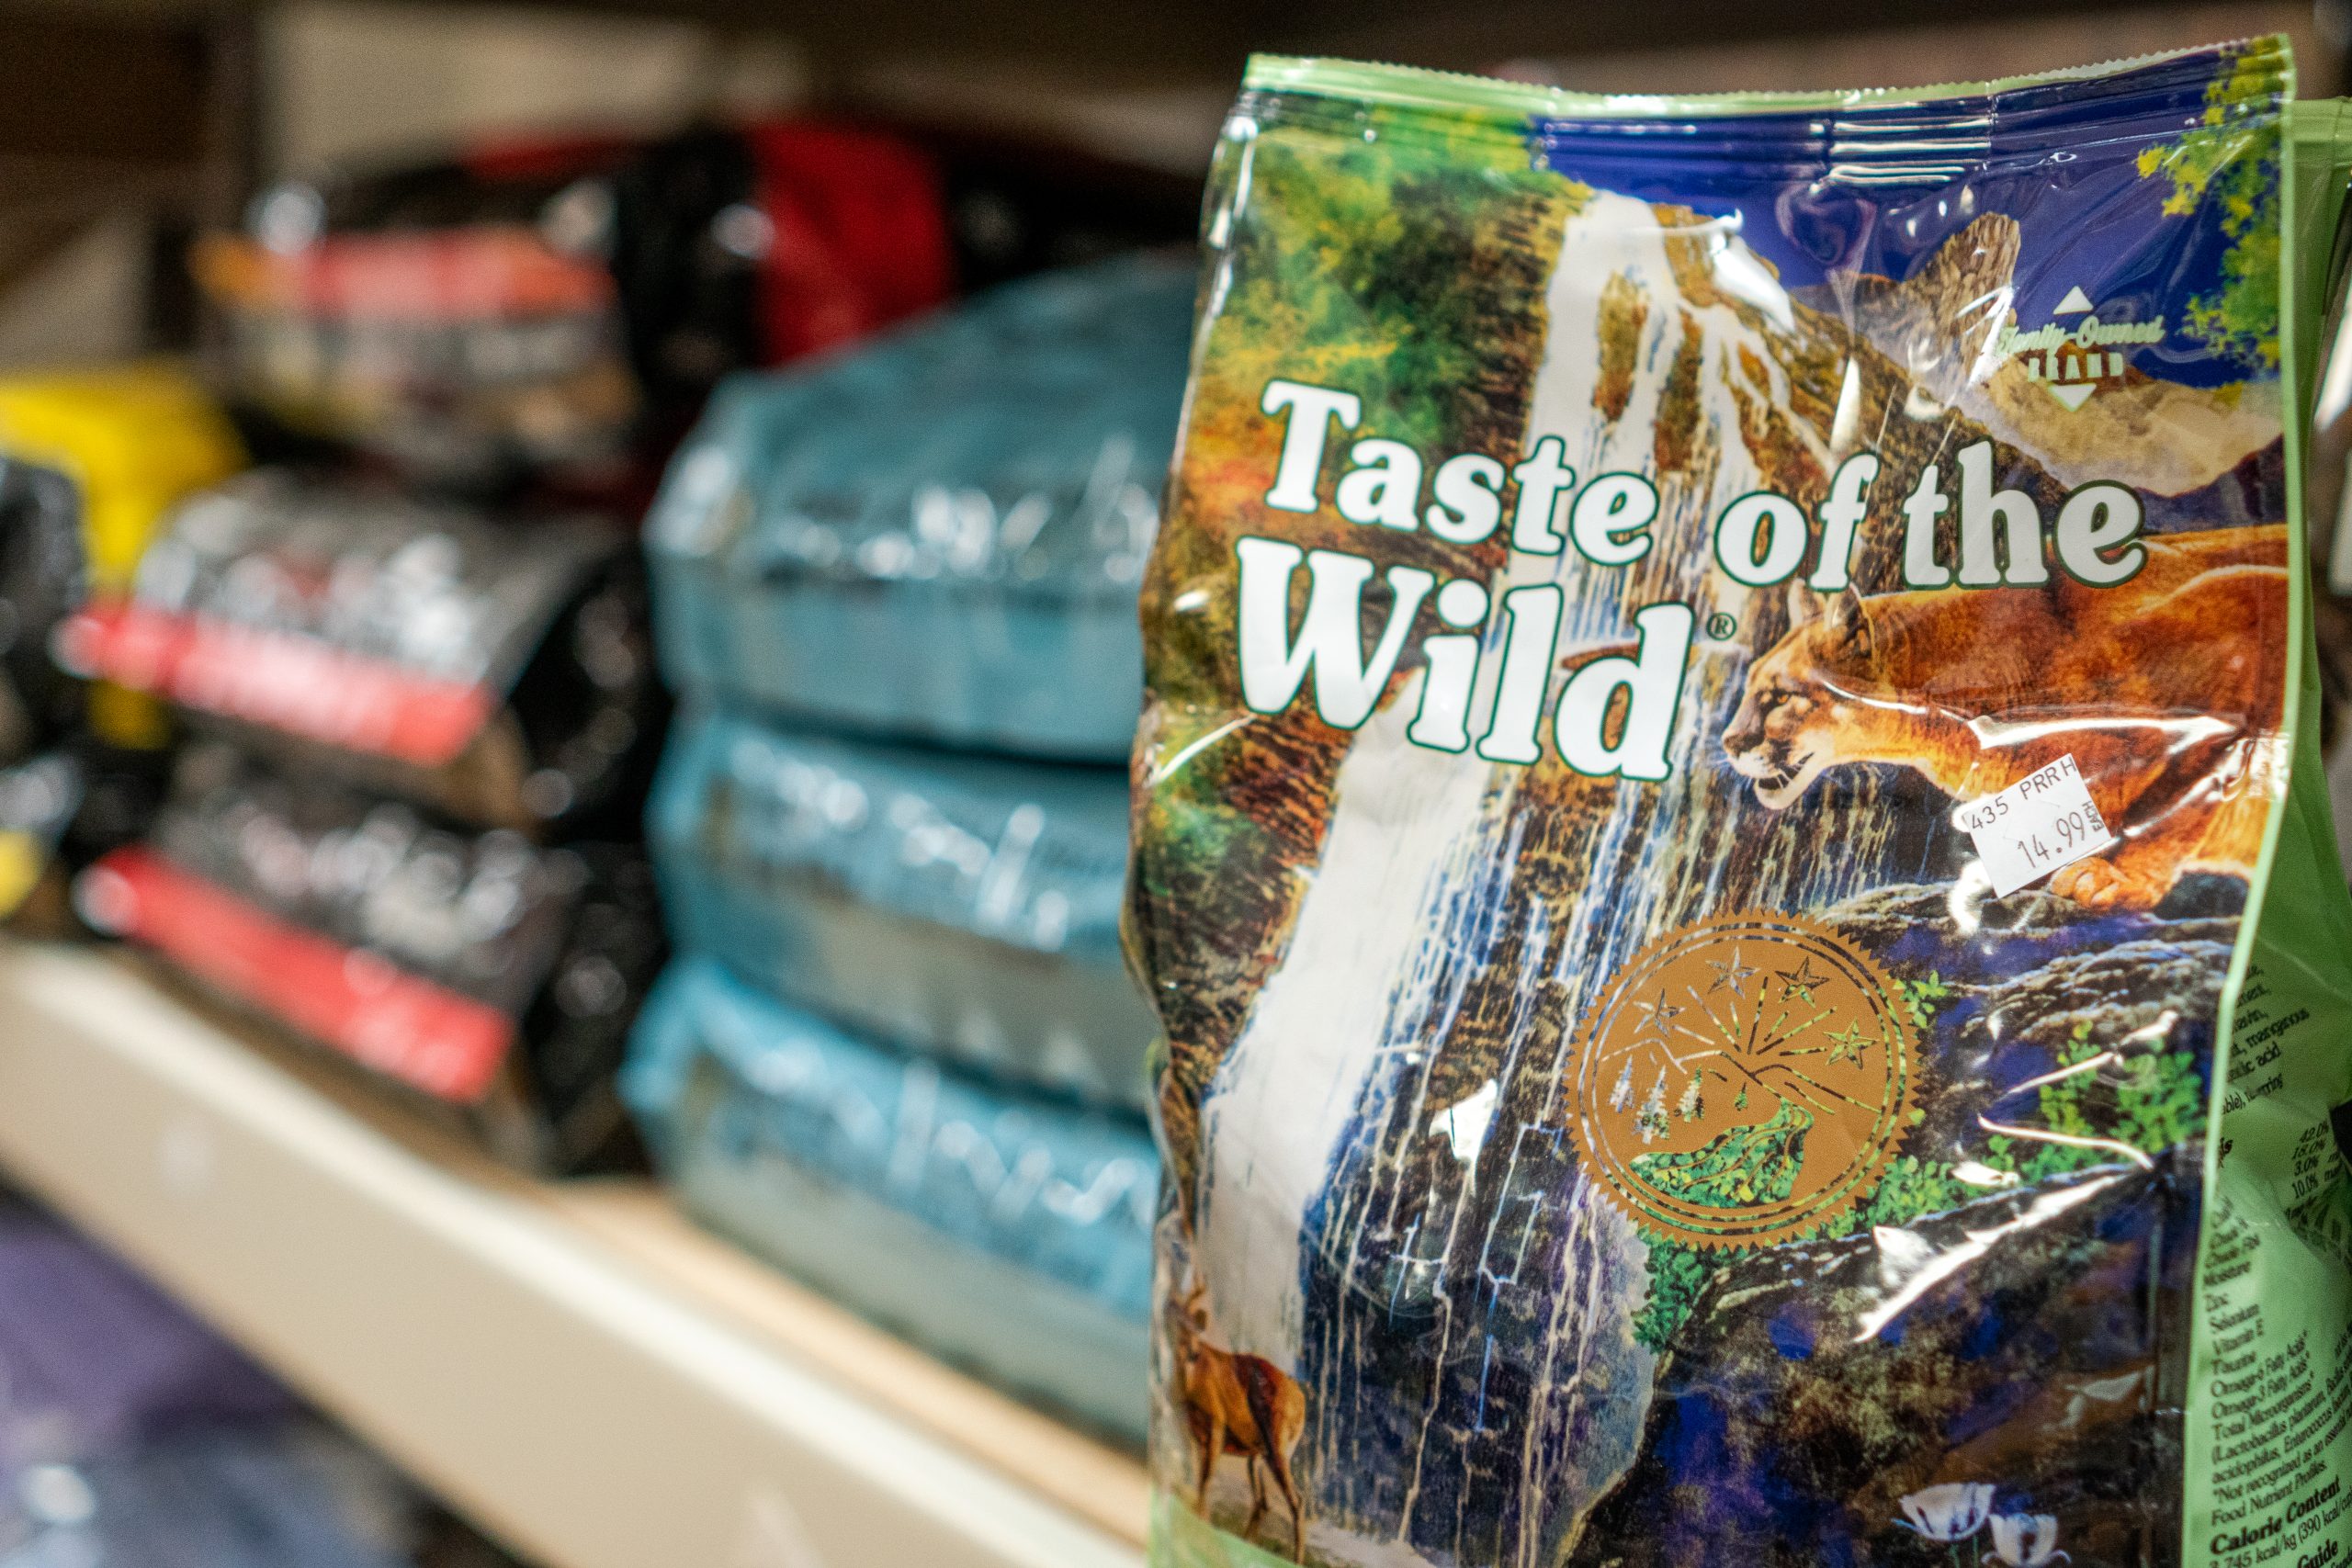 Taste of the Wild pet food next to other bags of pet food